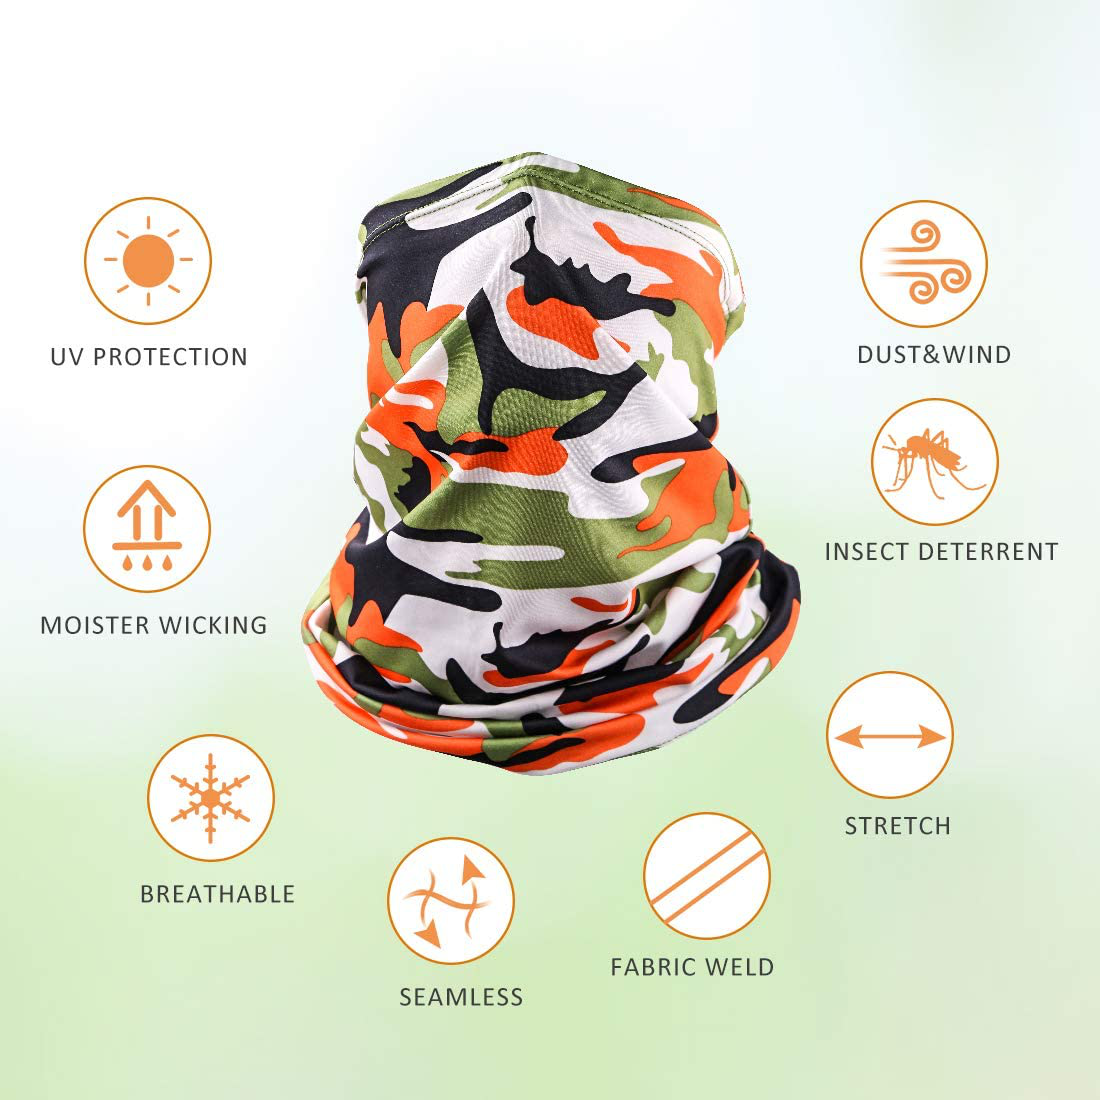 LUOLIIL VOE 5 Pieces Sun UV Protection Face Mask Neck Gaiter Windproof Scarf Sunscreen Breathable for Sport&Outdoor……